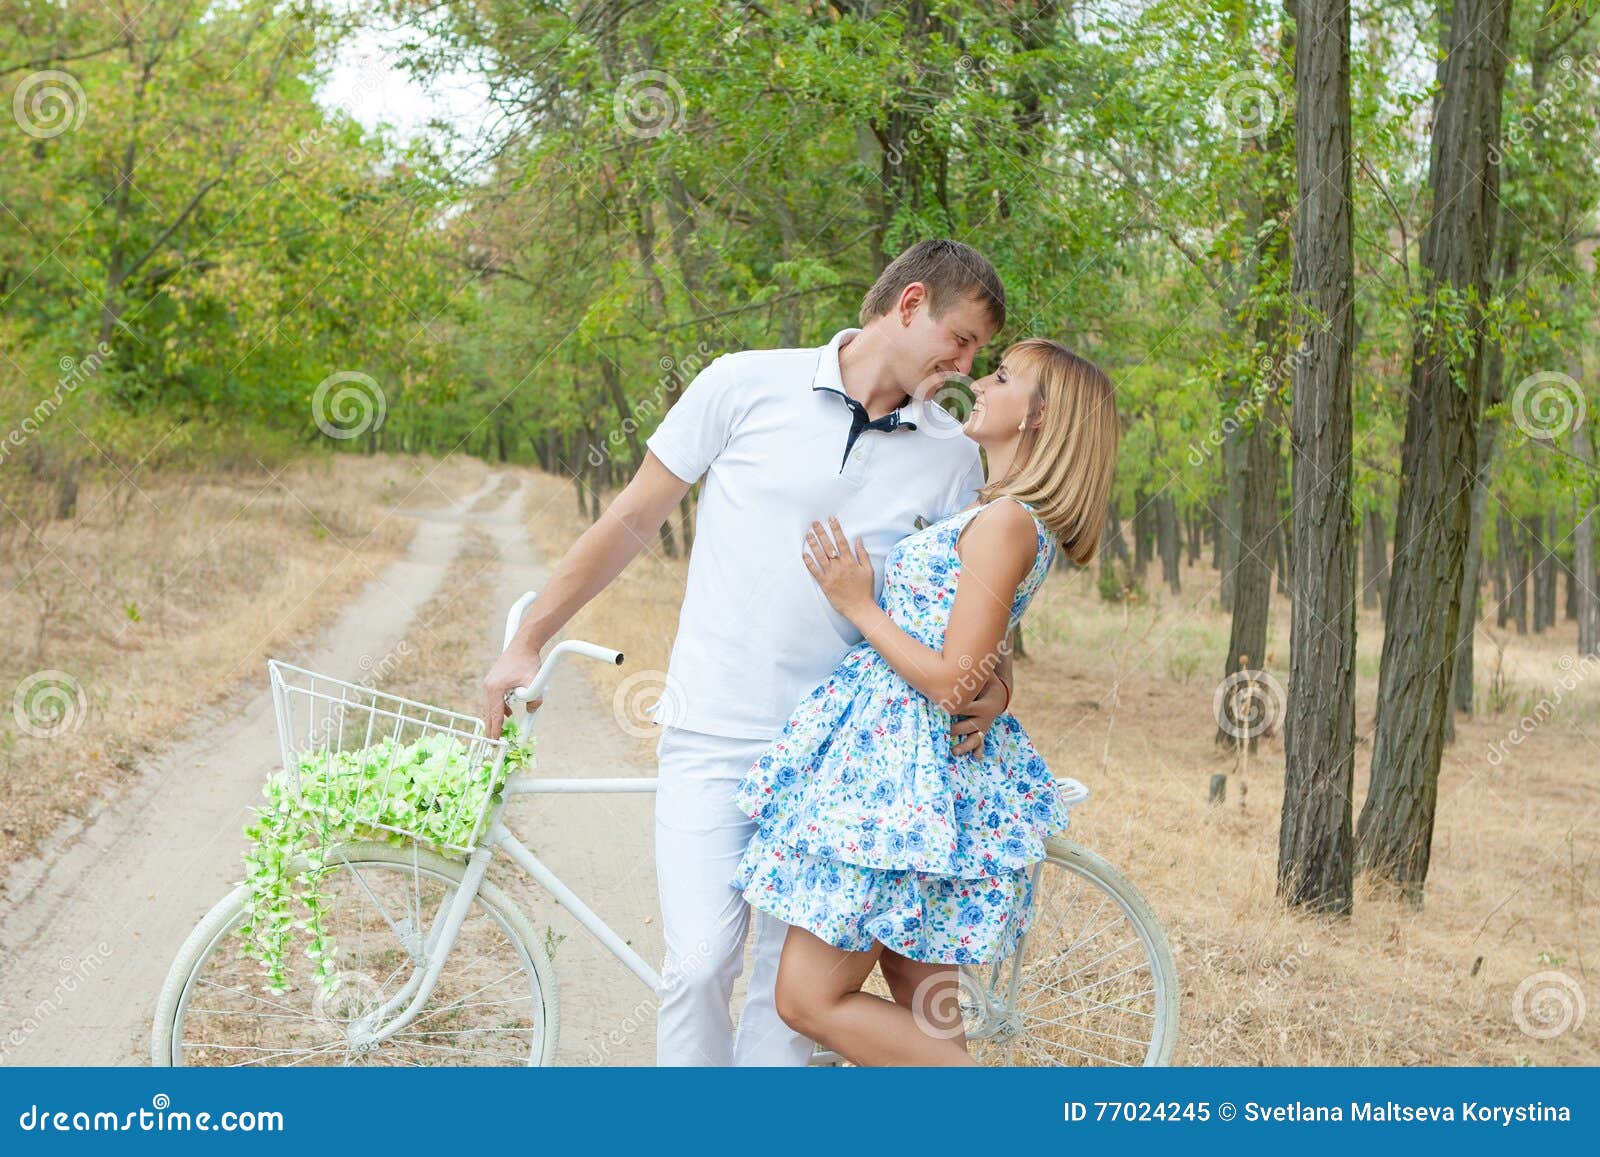 https://thumbs.dreamstime.com/z/loving-man-woman-cheerful-couple-having-fun-summer-vacation-happy-men-husband-wife-bike-young-couple-forest-77024245.jpg